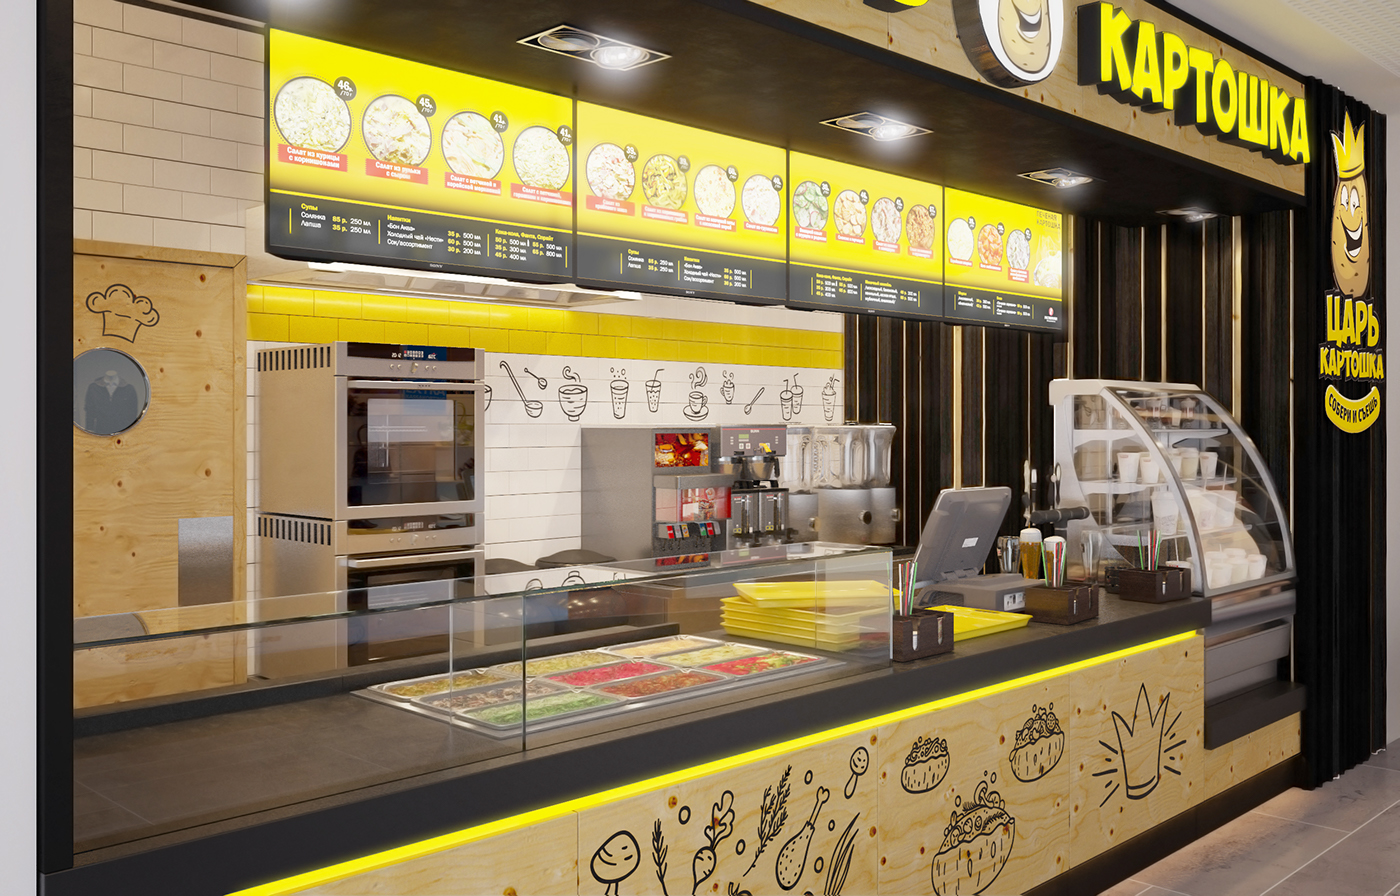 Protestant Badly Reserve Design of the food court cafe on Behance